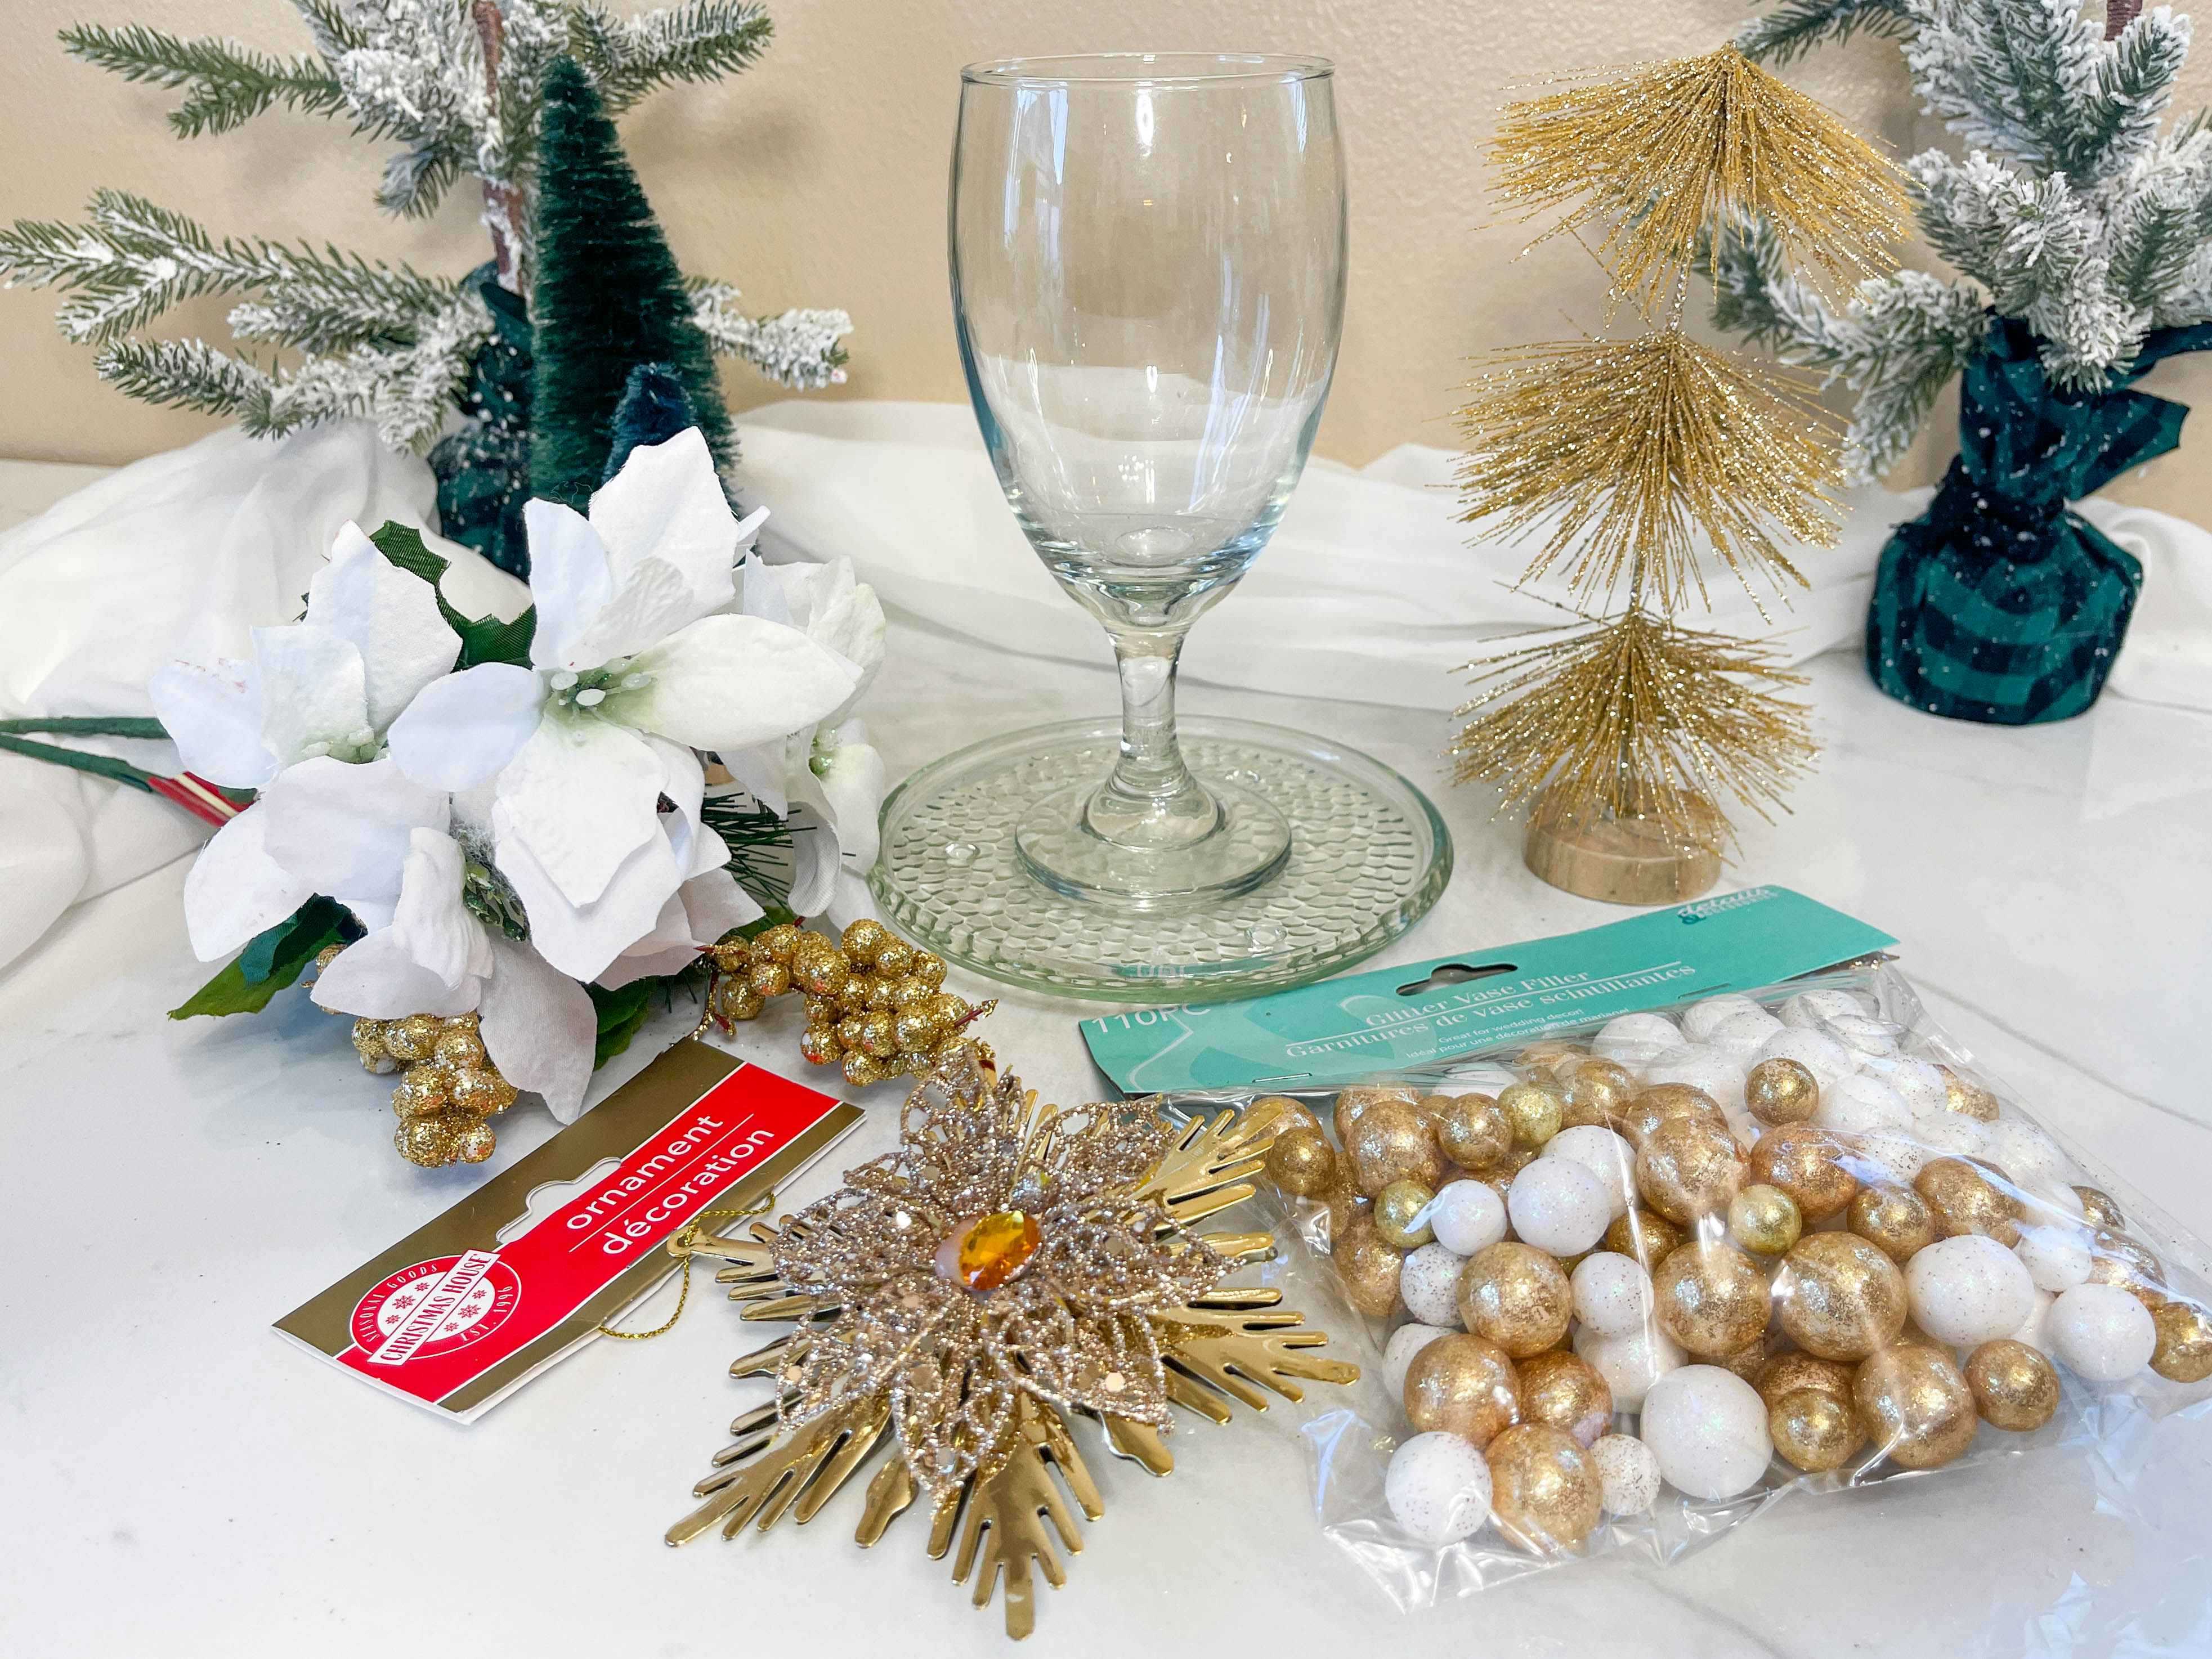 supplies to make a wine glass candle holder on table